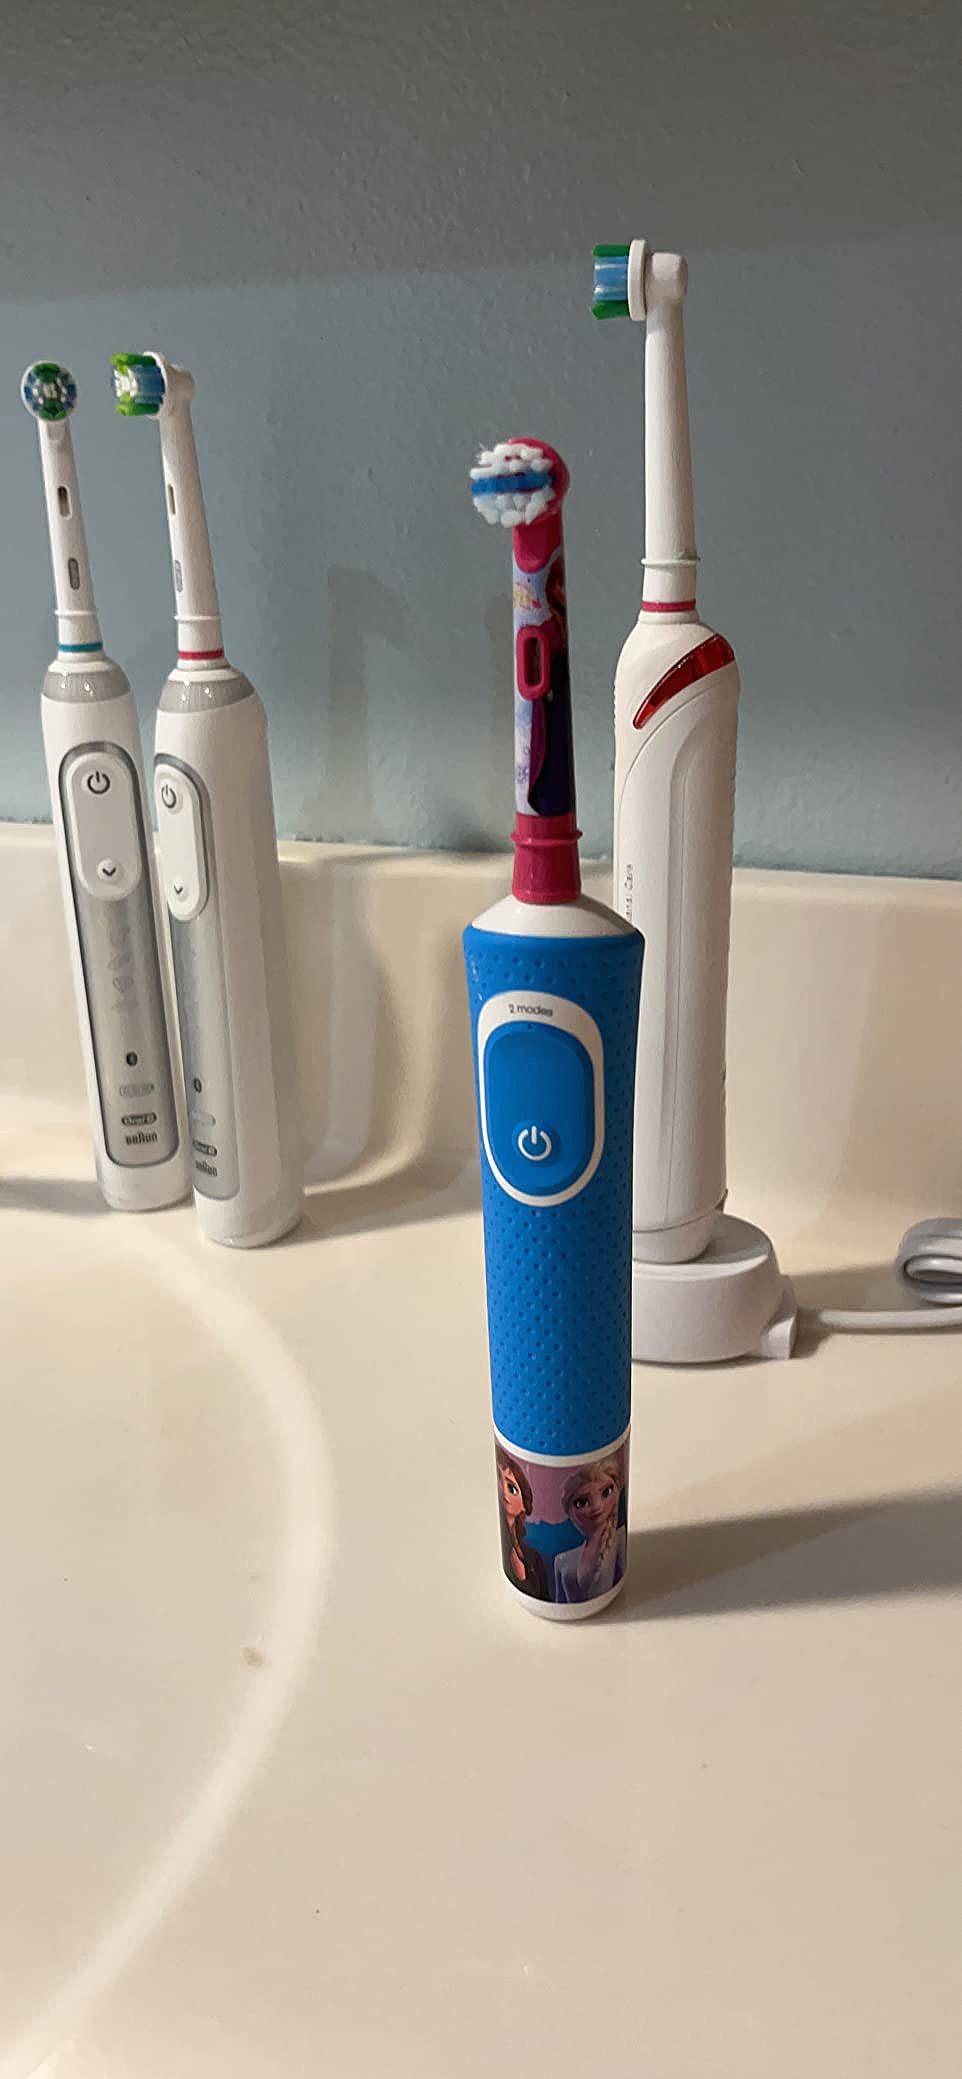  Oral-B Kids Electric Toothbrush Featuring Disney's Frozen for Kids 3+    